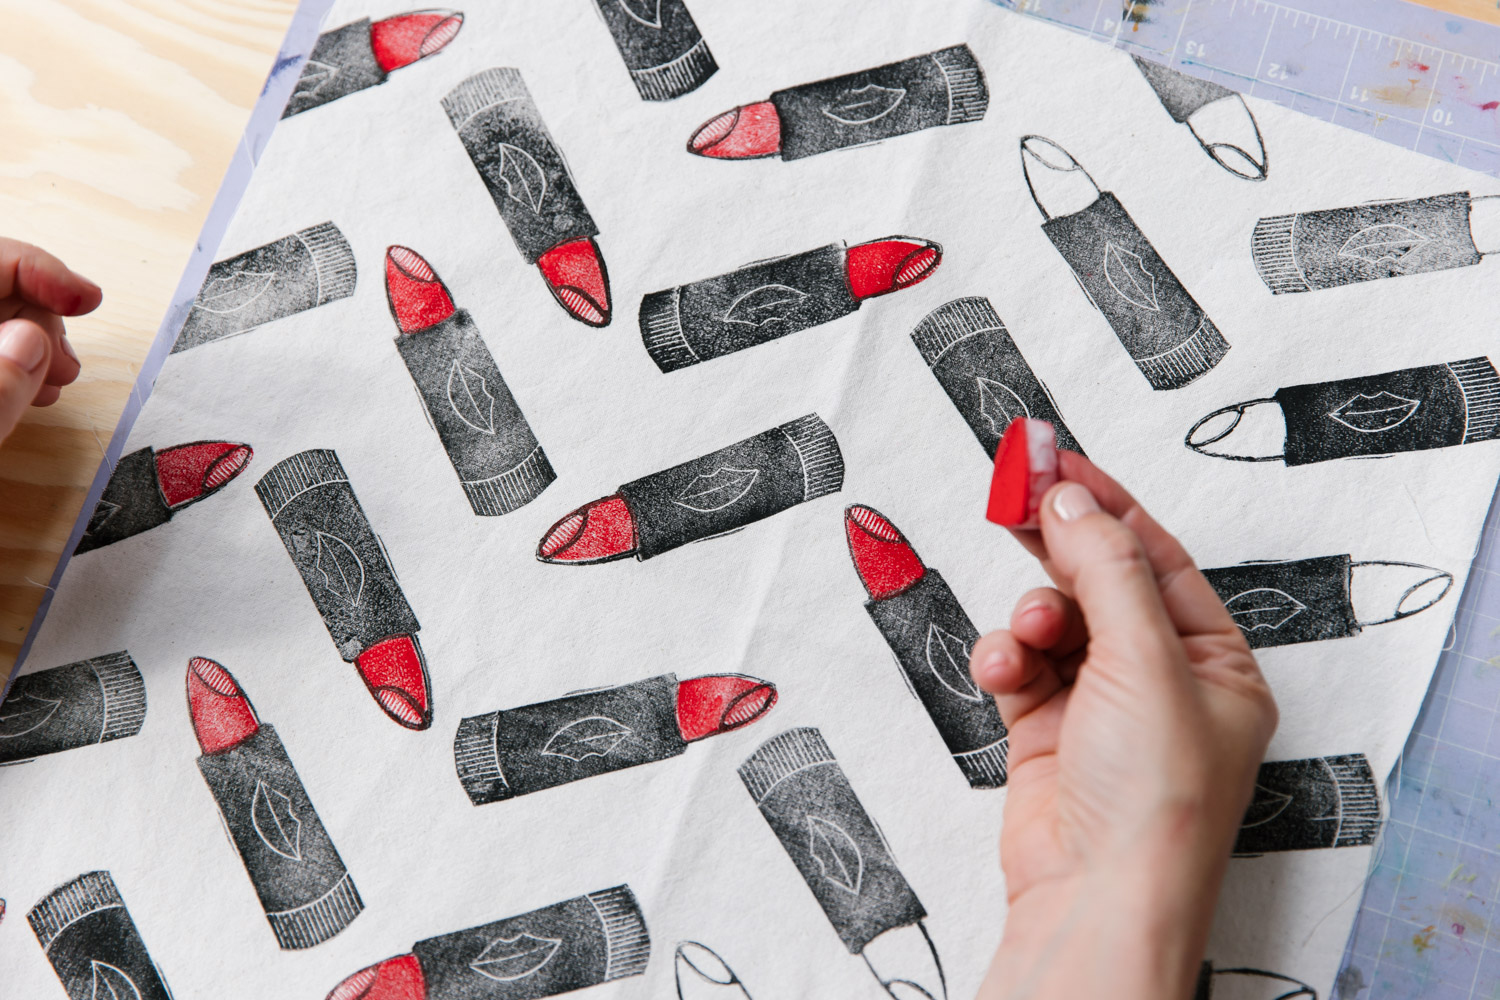 Printing by hand using hand carved rubber stamps onto fabric in the design of lipstick